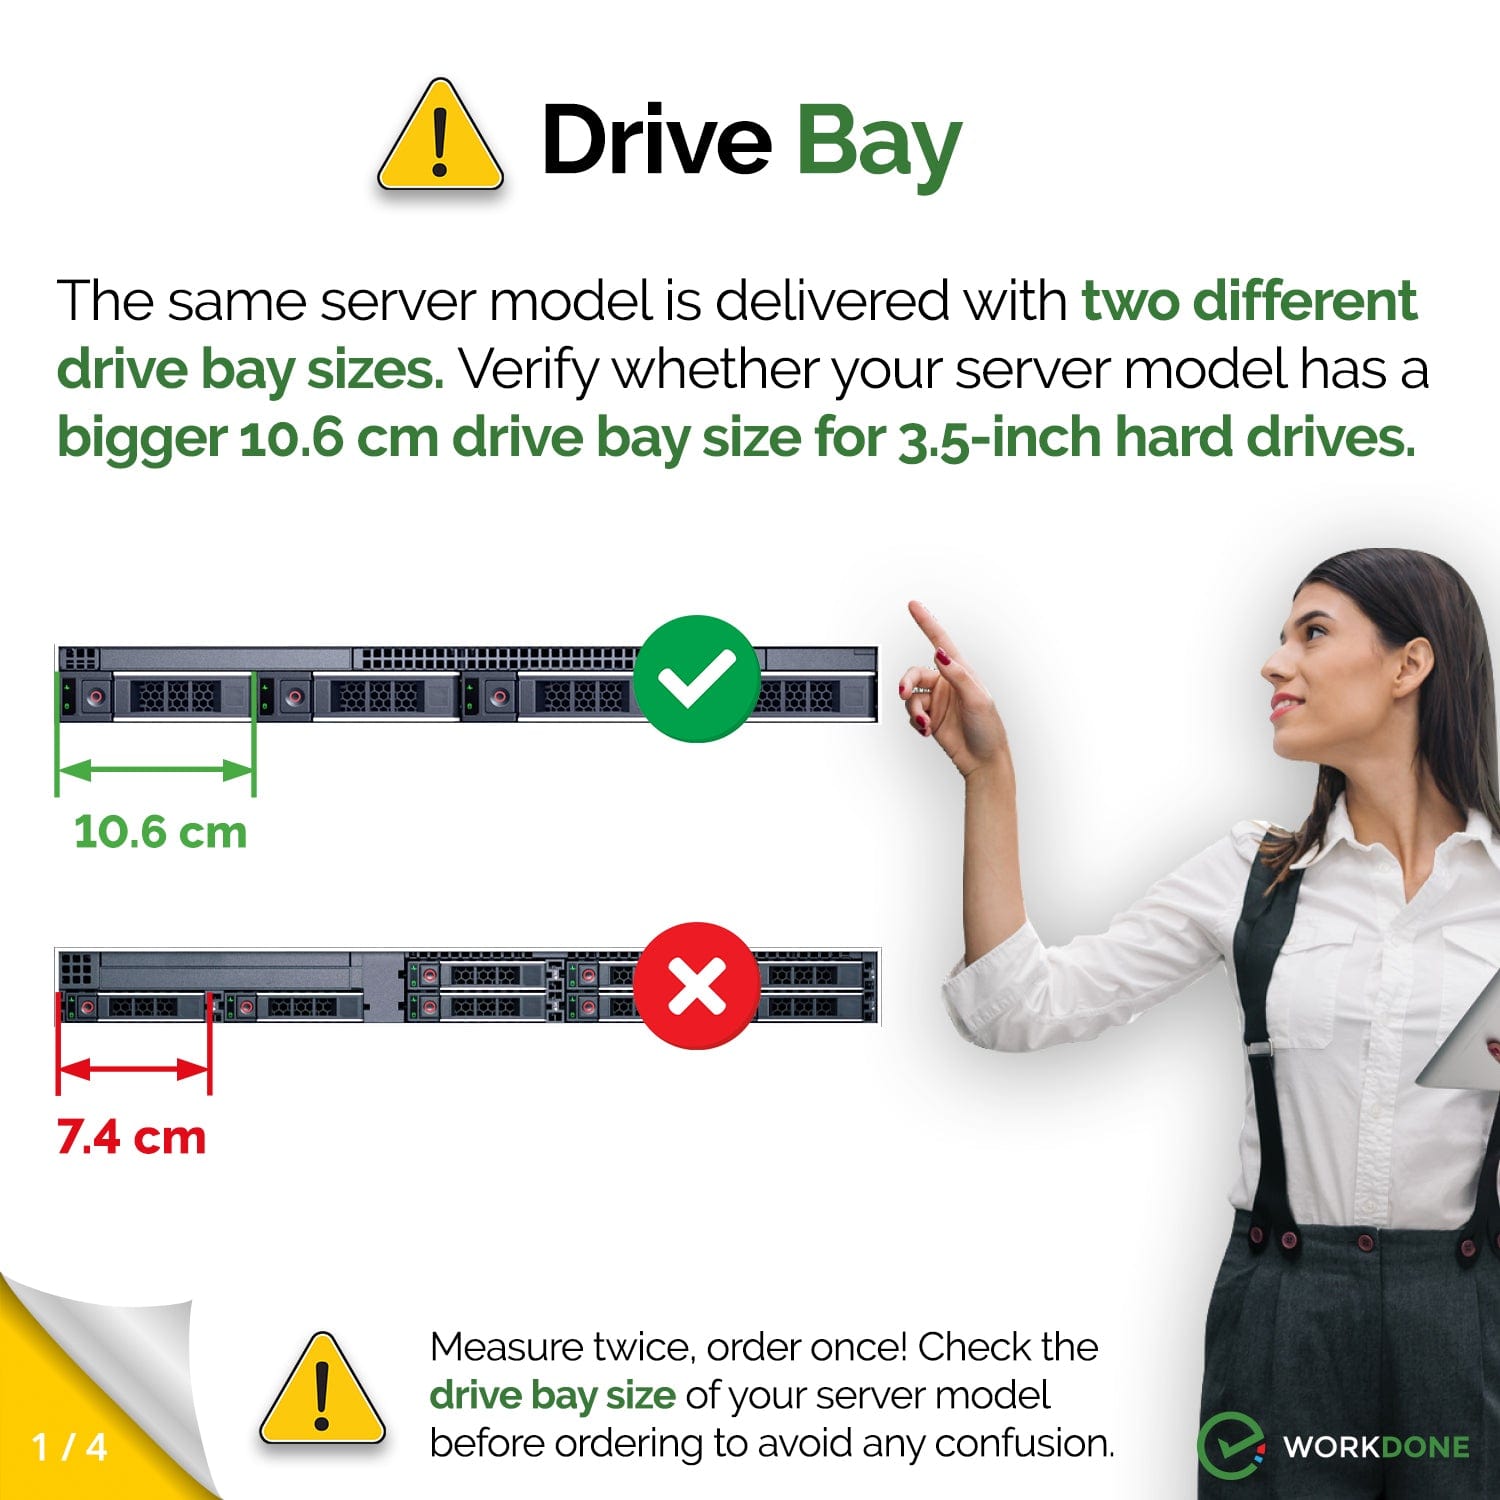 WORKDONE 2-Pack 3.5 inch Drive for R6415 R7415 R7425 Servers